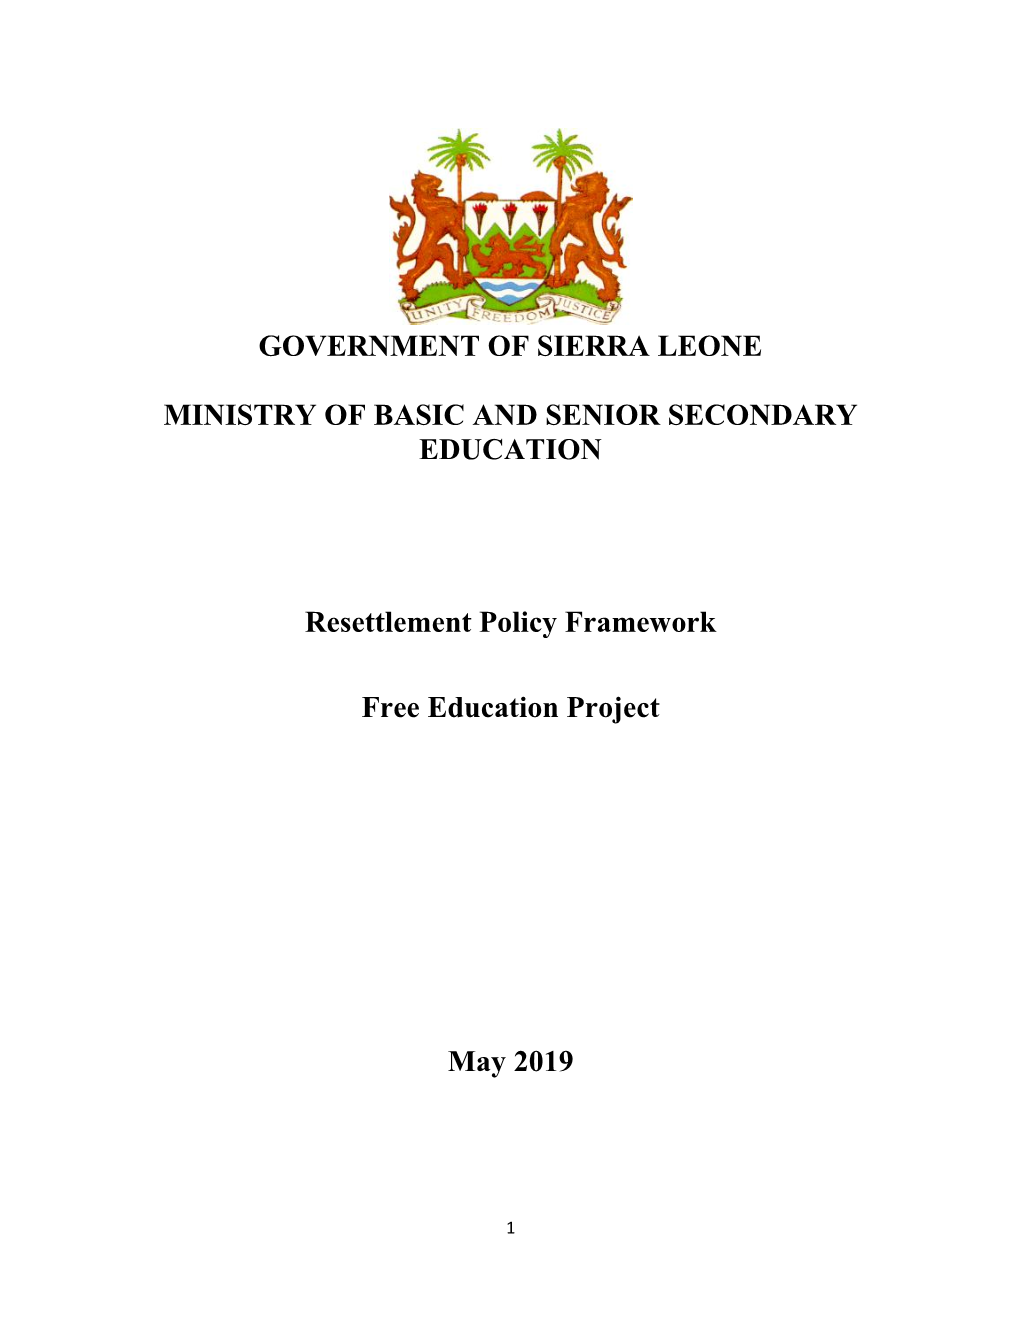 GOVERNMENT of SIERRA LEONE MINISTRY of BASIC and SENIOR SECONDARY EDUCATION Resettlement Policy Framework Free Education Project